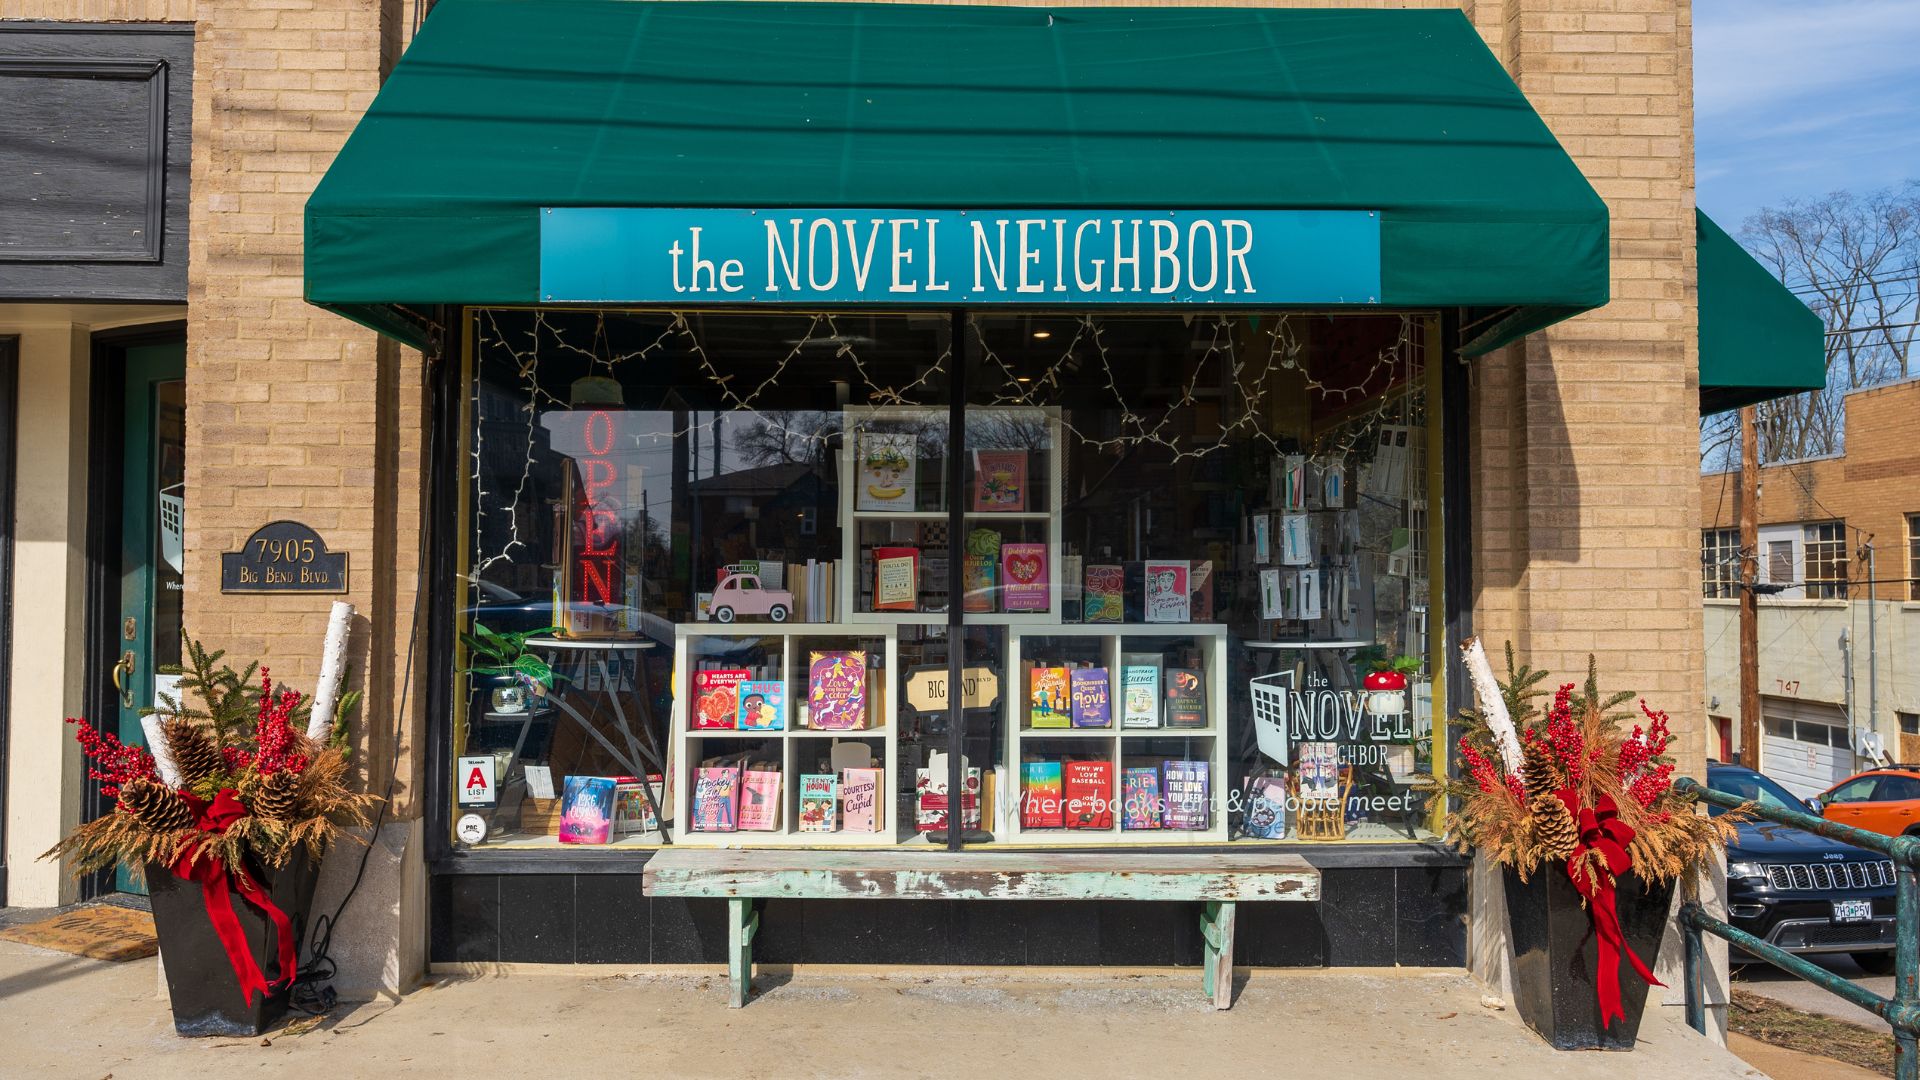 The Novel Neighbor is located in the Webster Groves neighborhood in St. Louis.